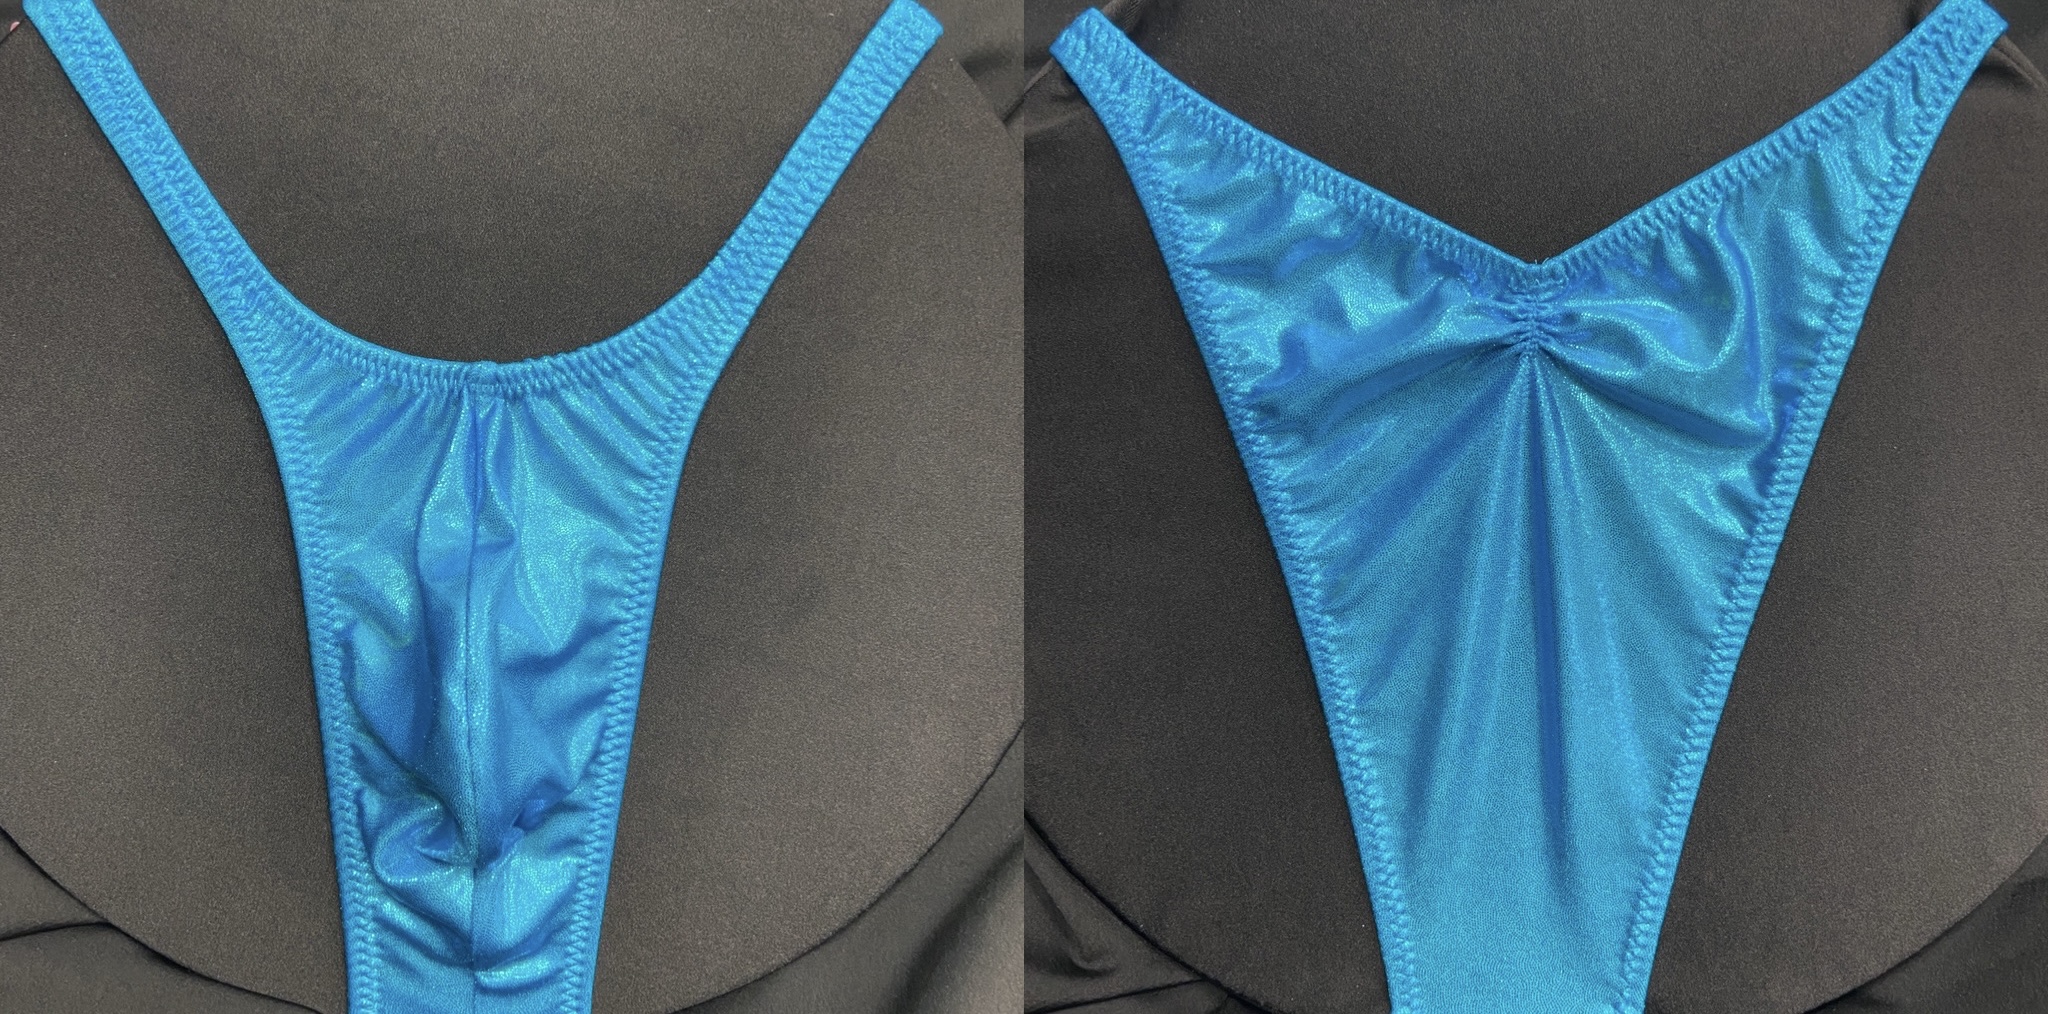 Aqua Shimmer Frost
Pro Cut 
available in S,M,L,XL
back gathers optional
$45.00